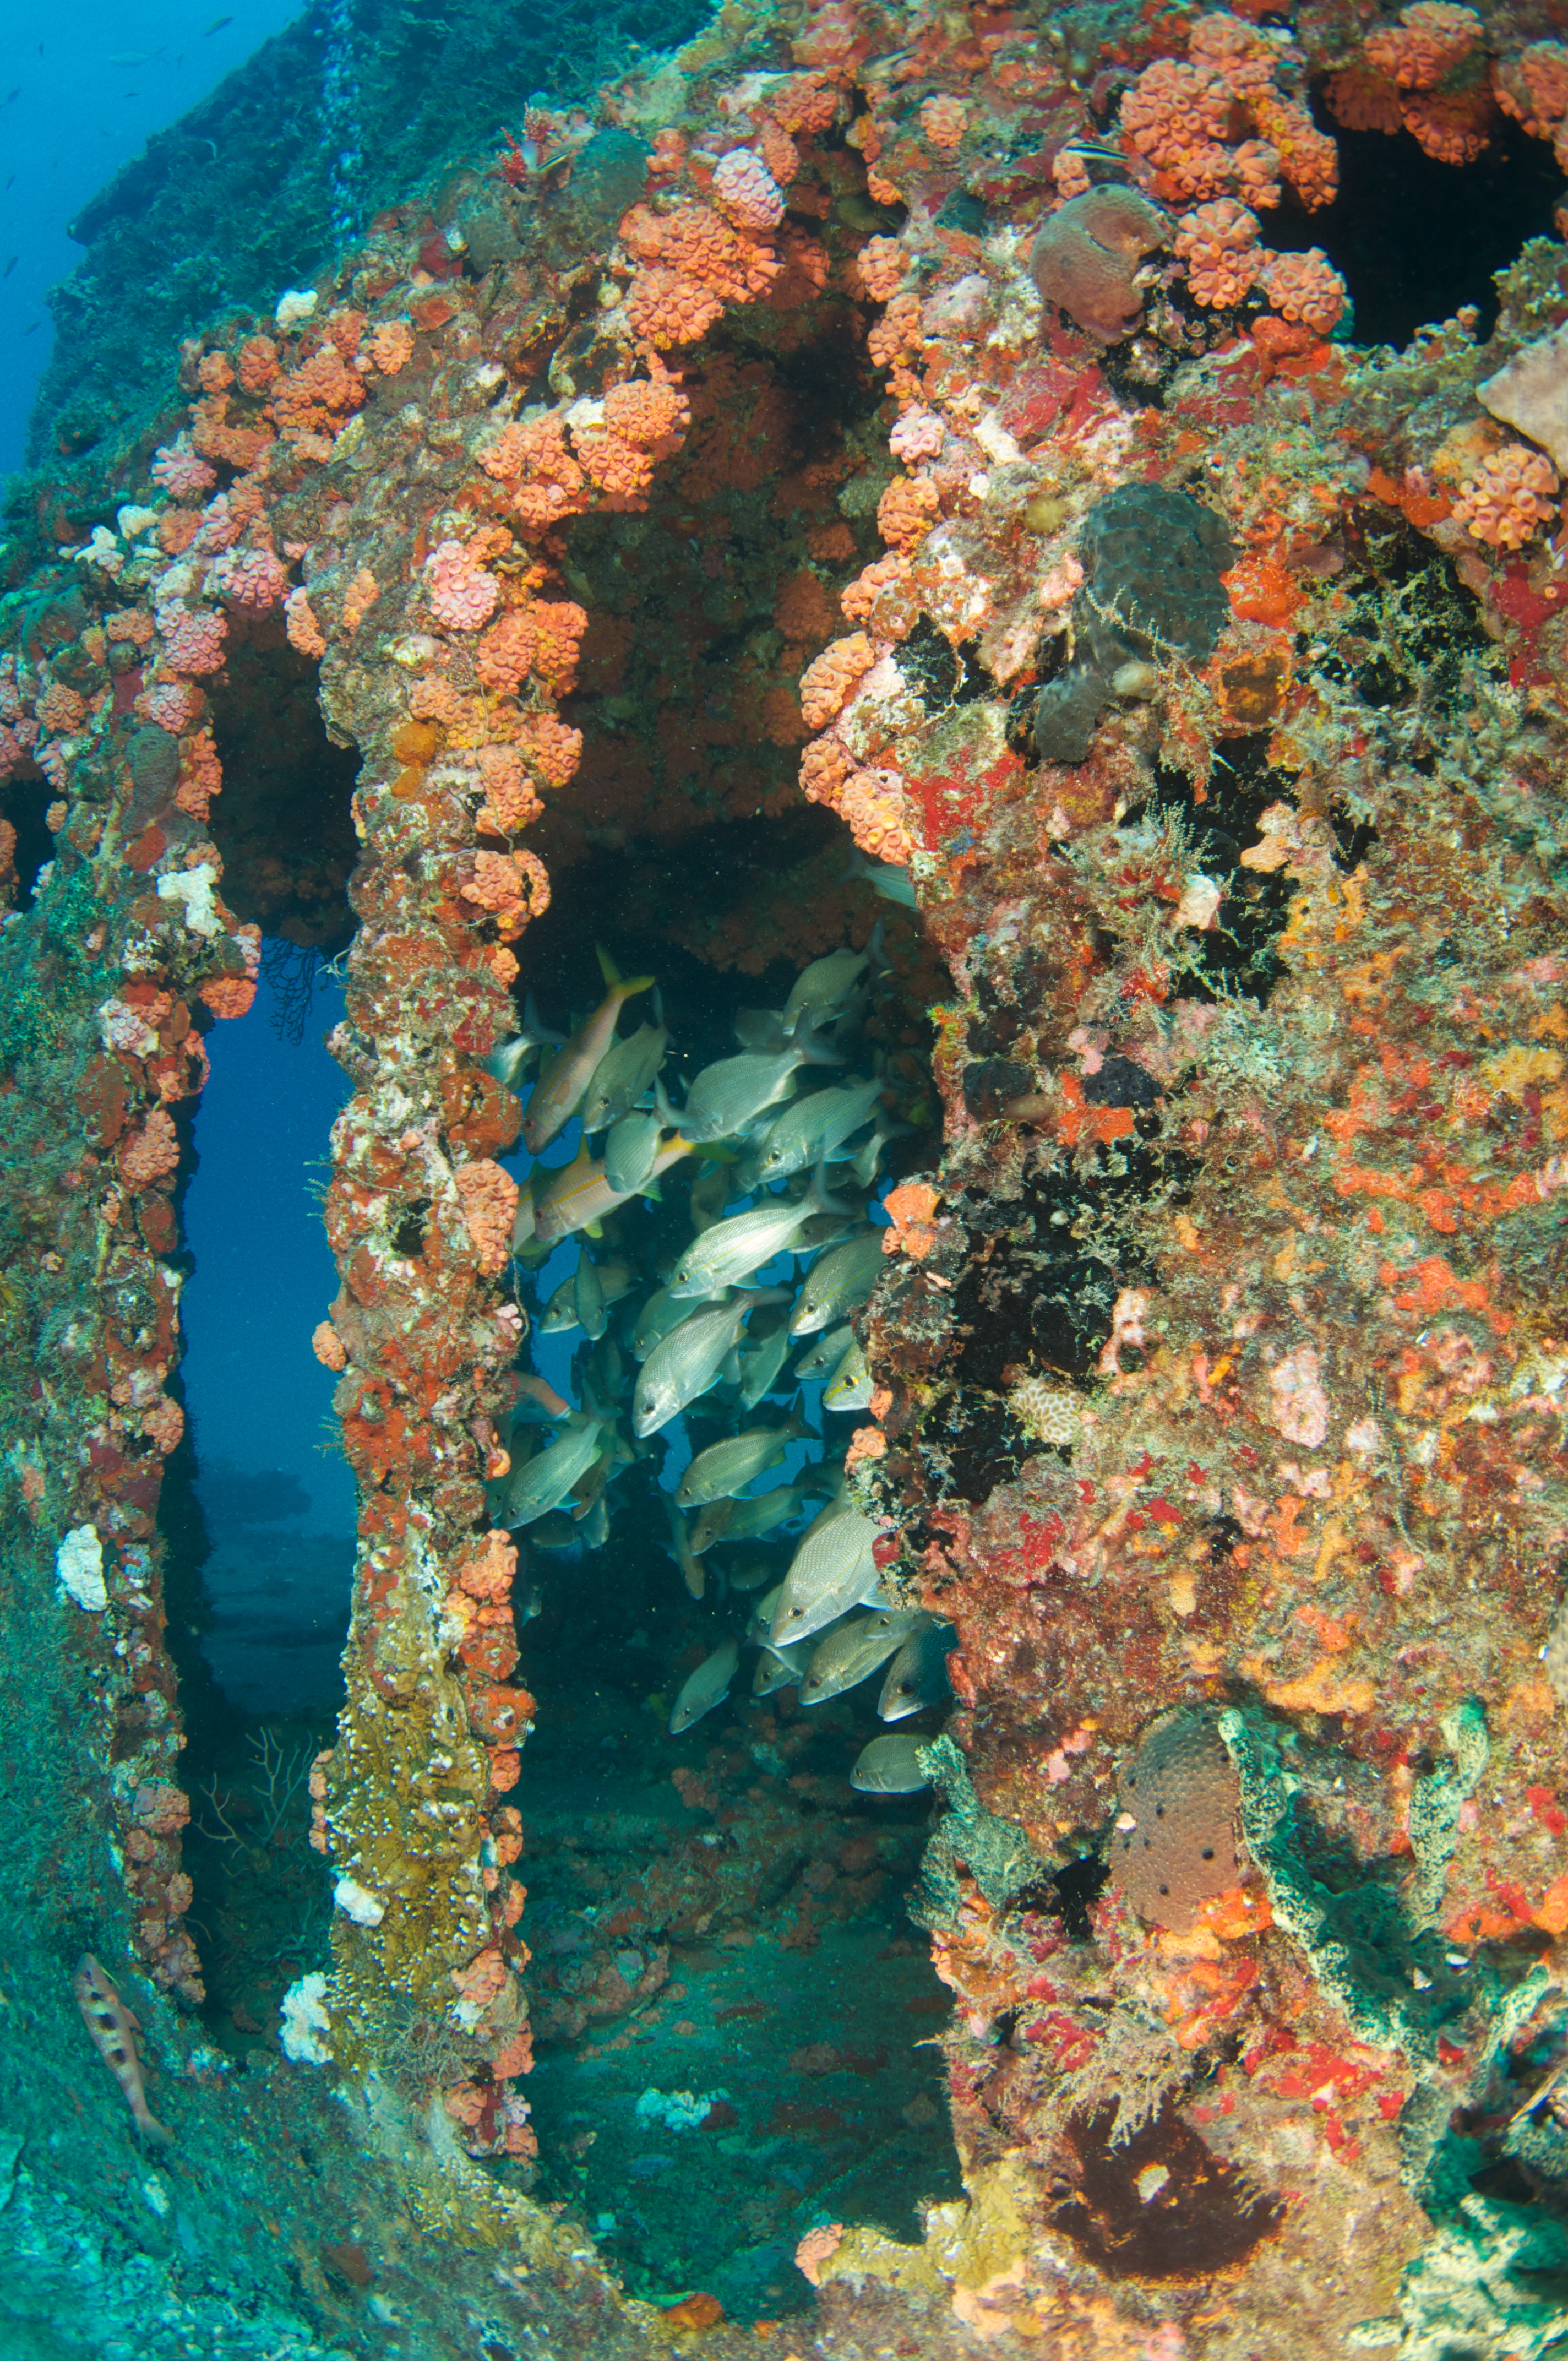 Schools of fish fill the windows of the Superior Producer wreck in Curacao